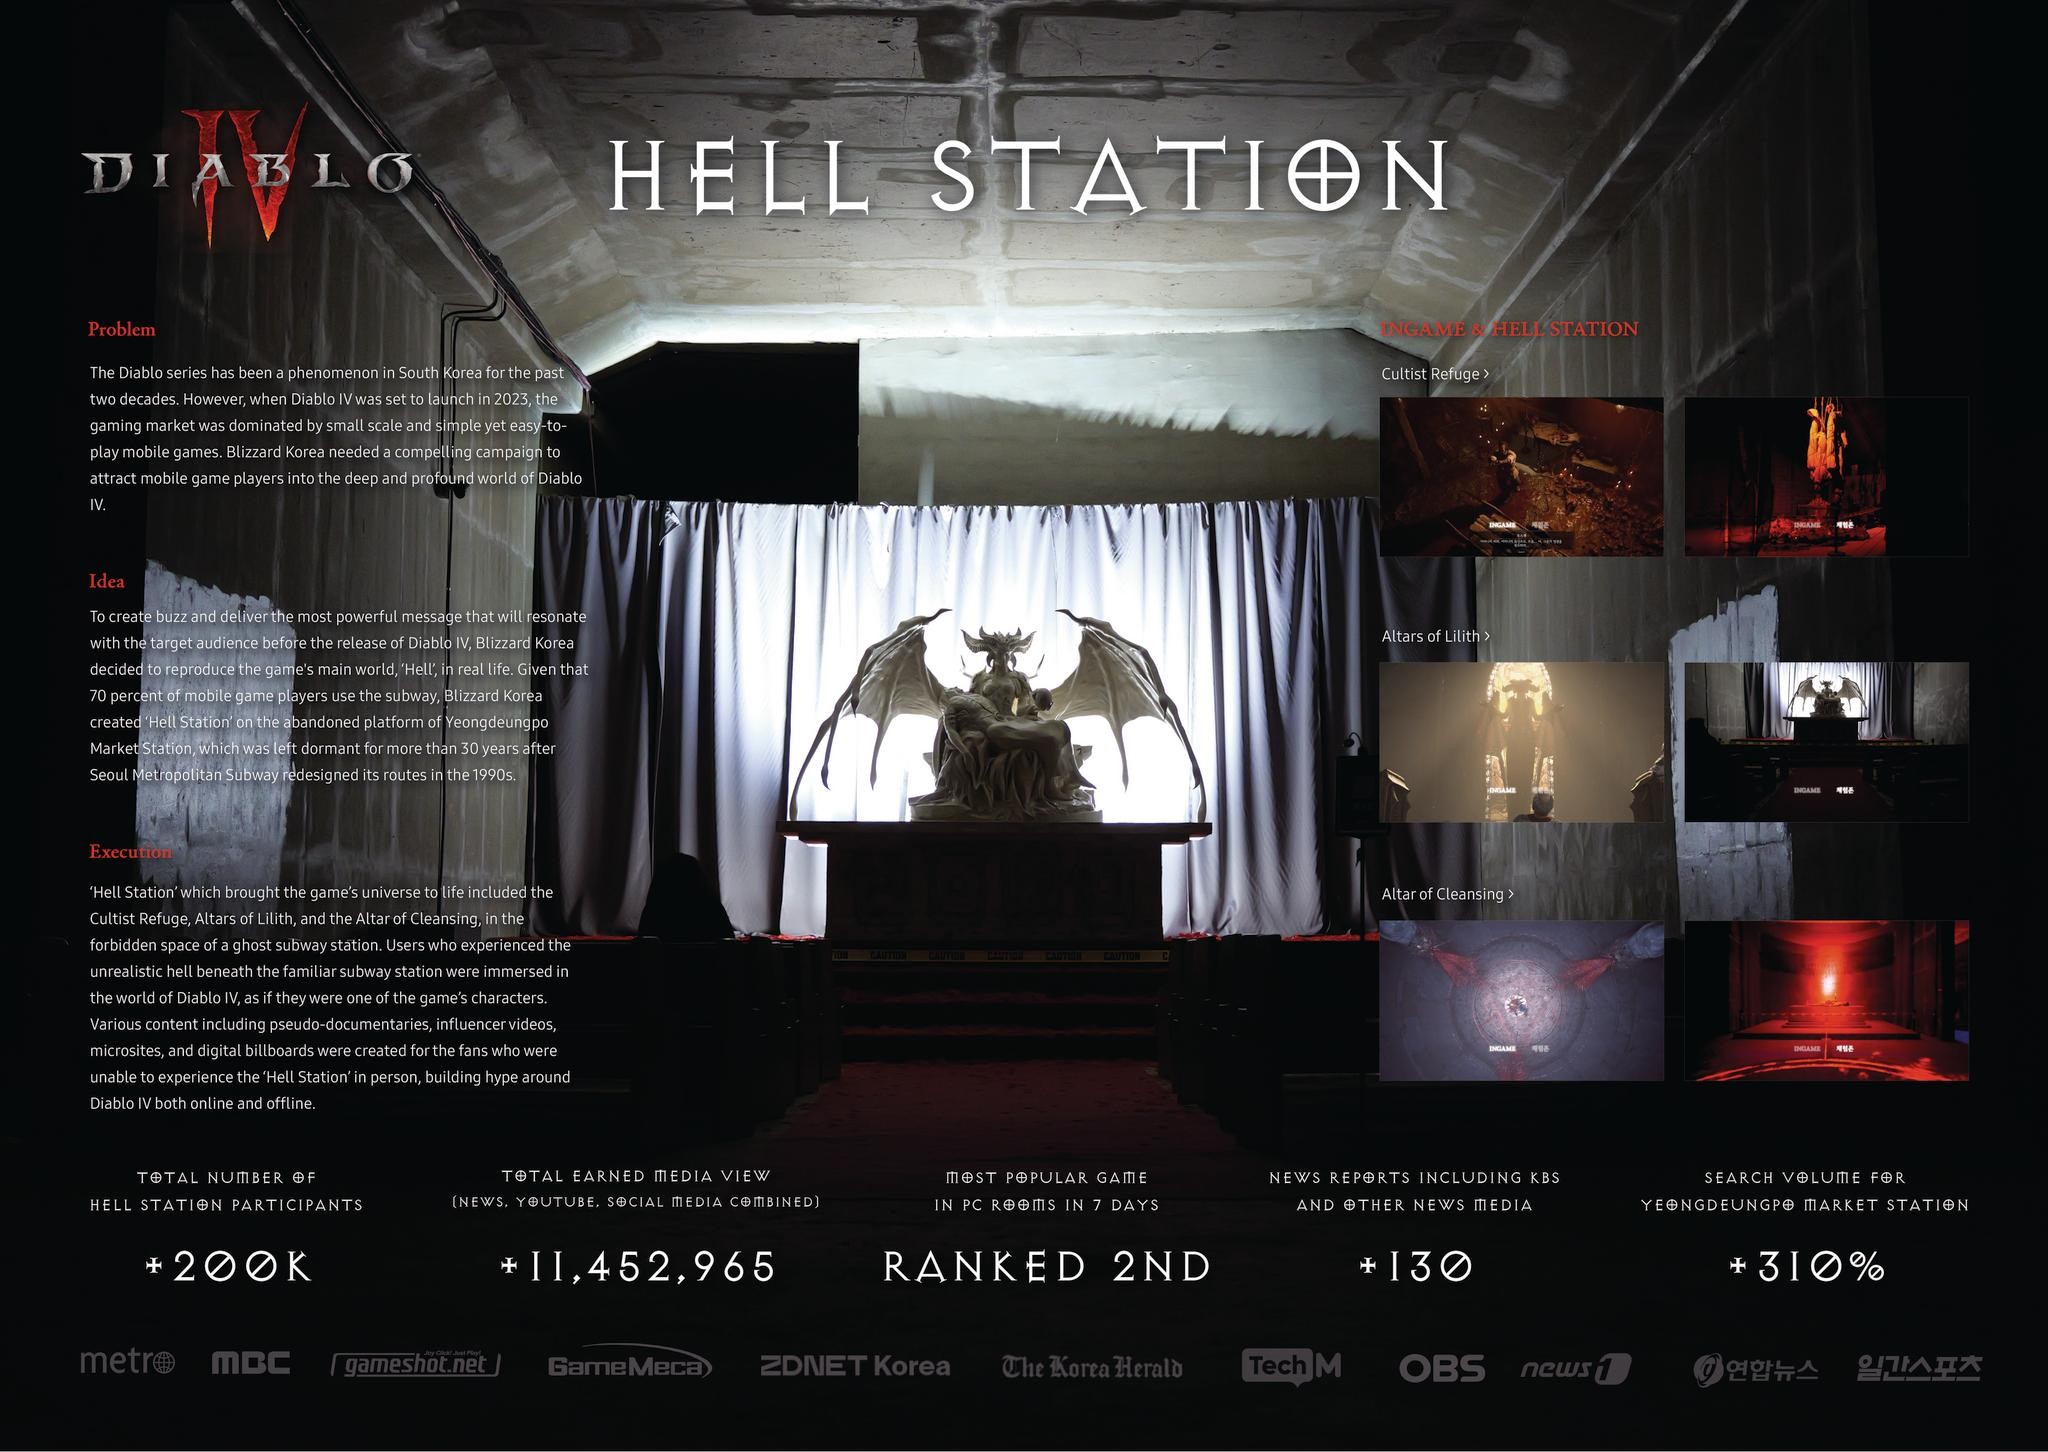 HELL STATION